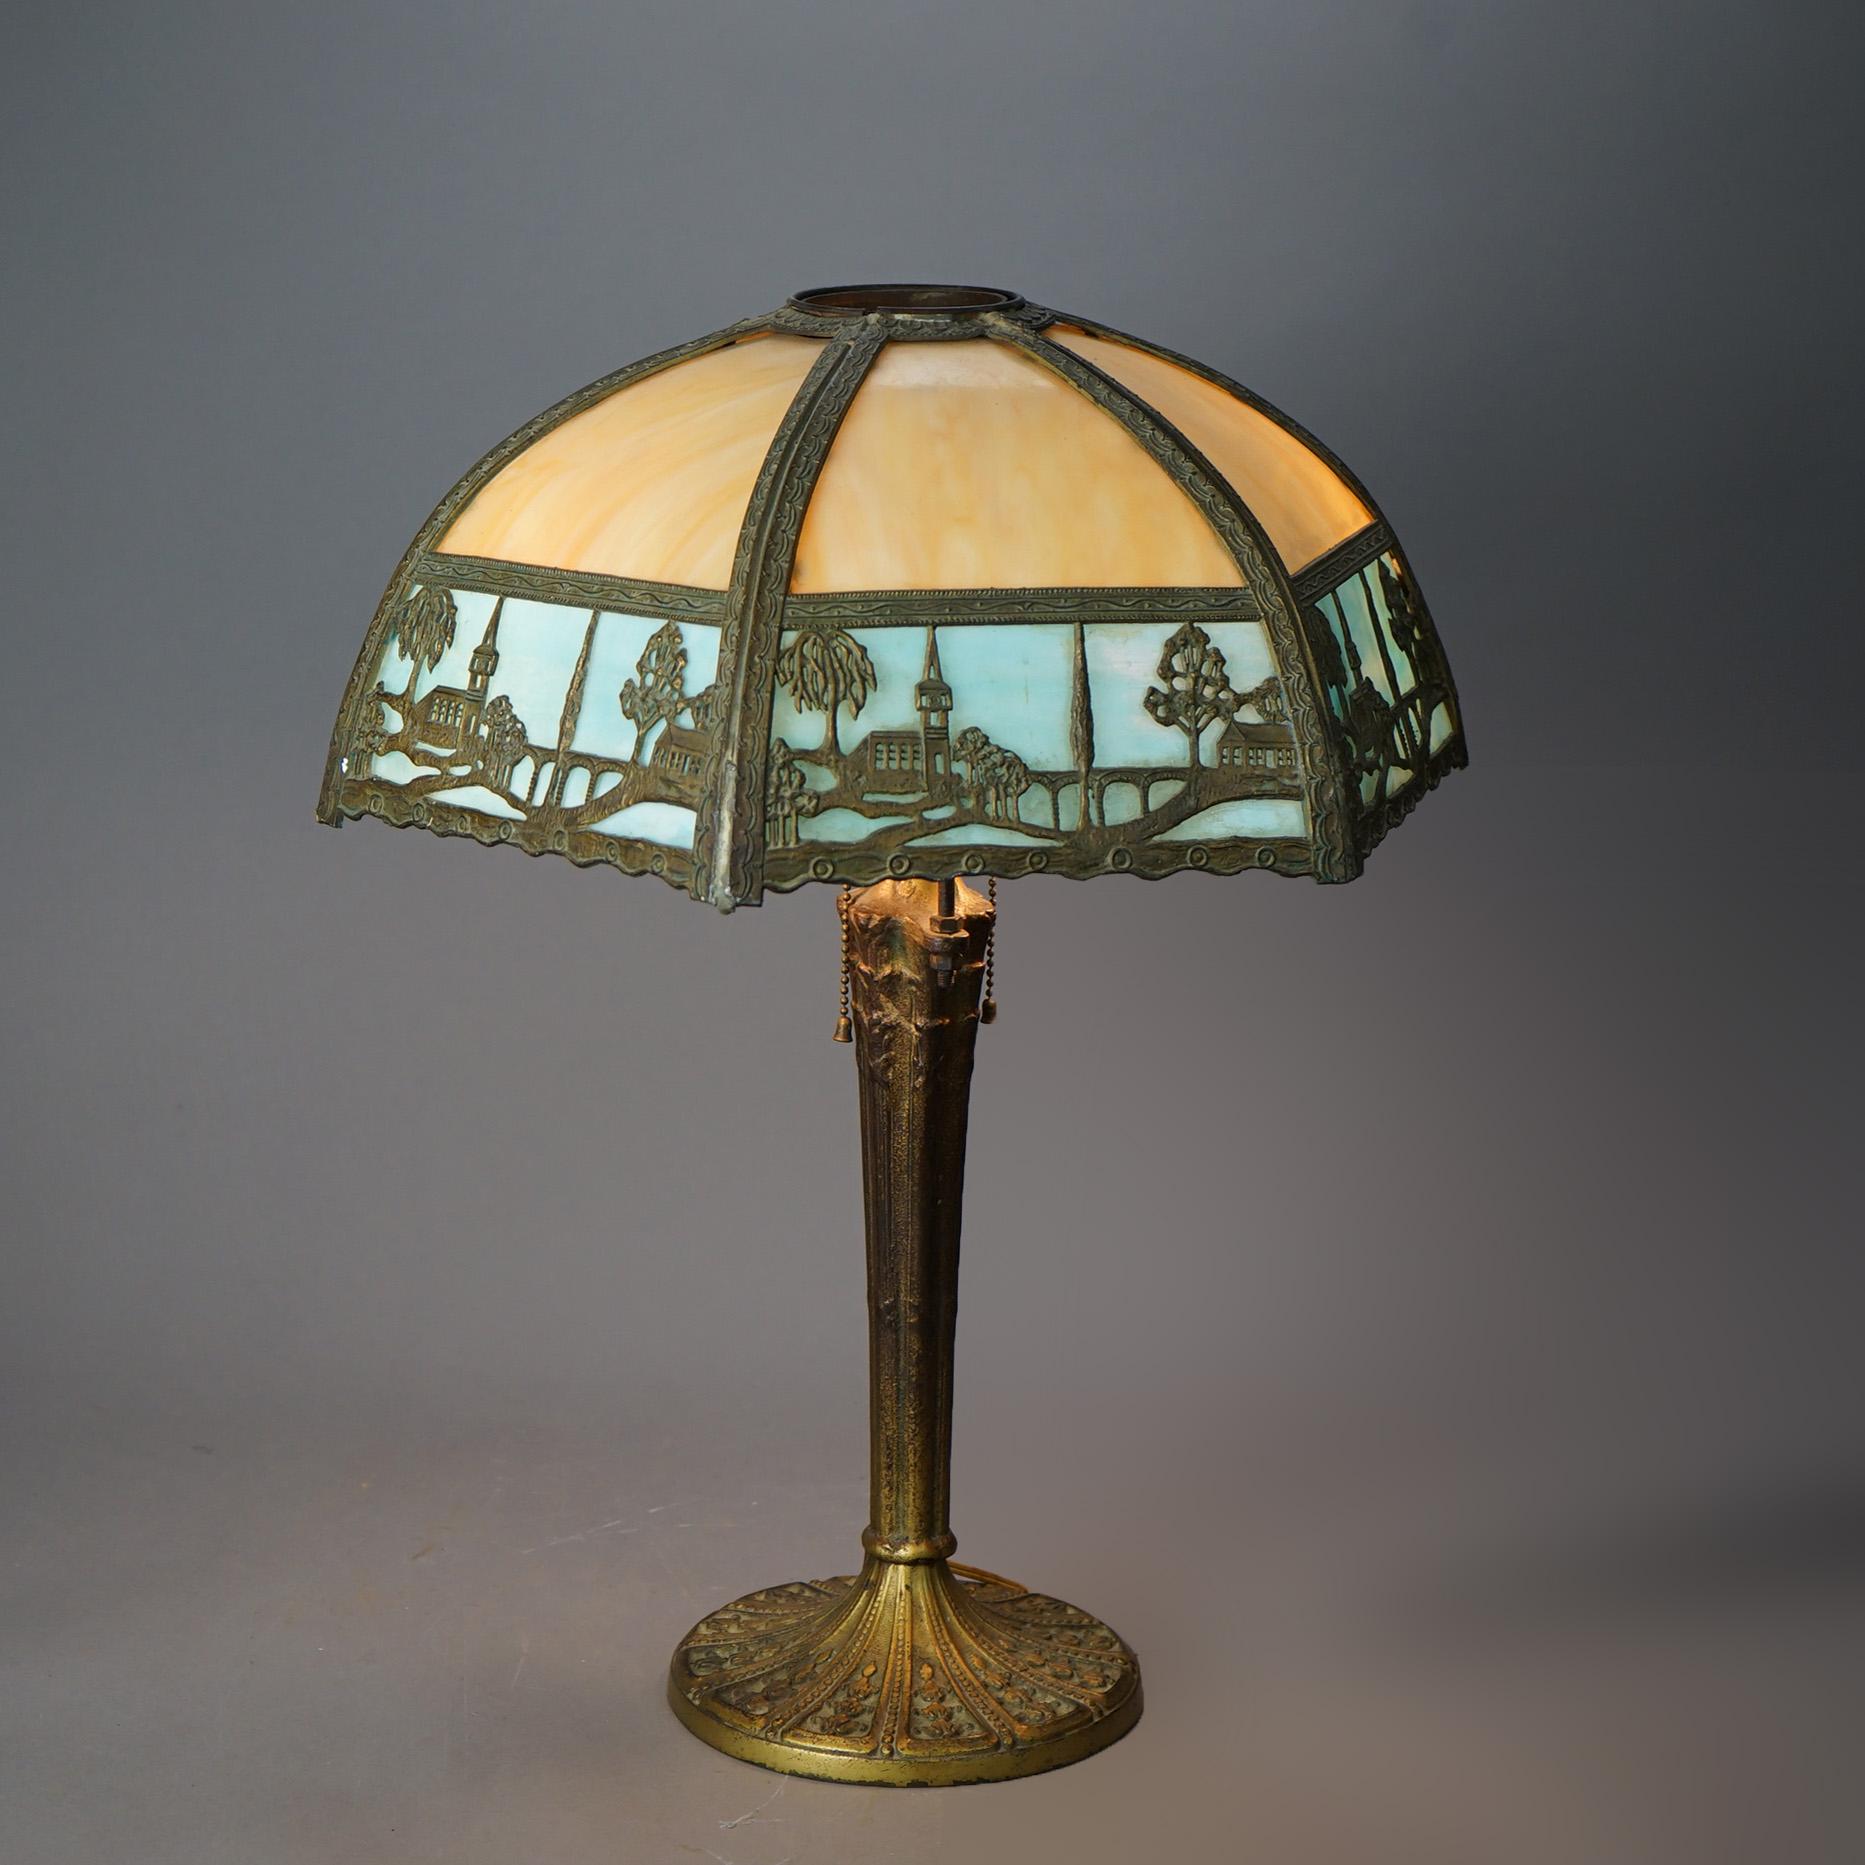 Antique Arts & Crafts Two-Tone Slag Glass Table Lamp, Scenic with Church, c1920 For Sale 4